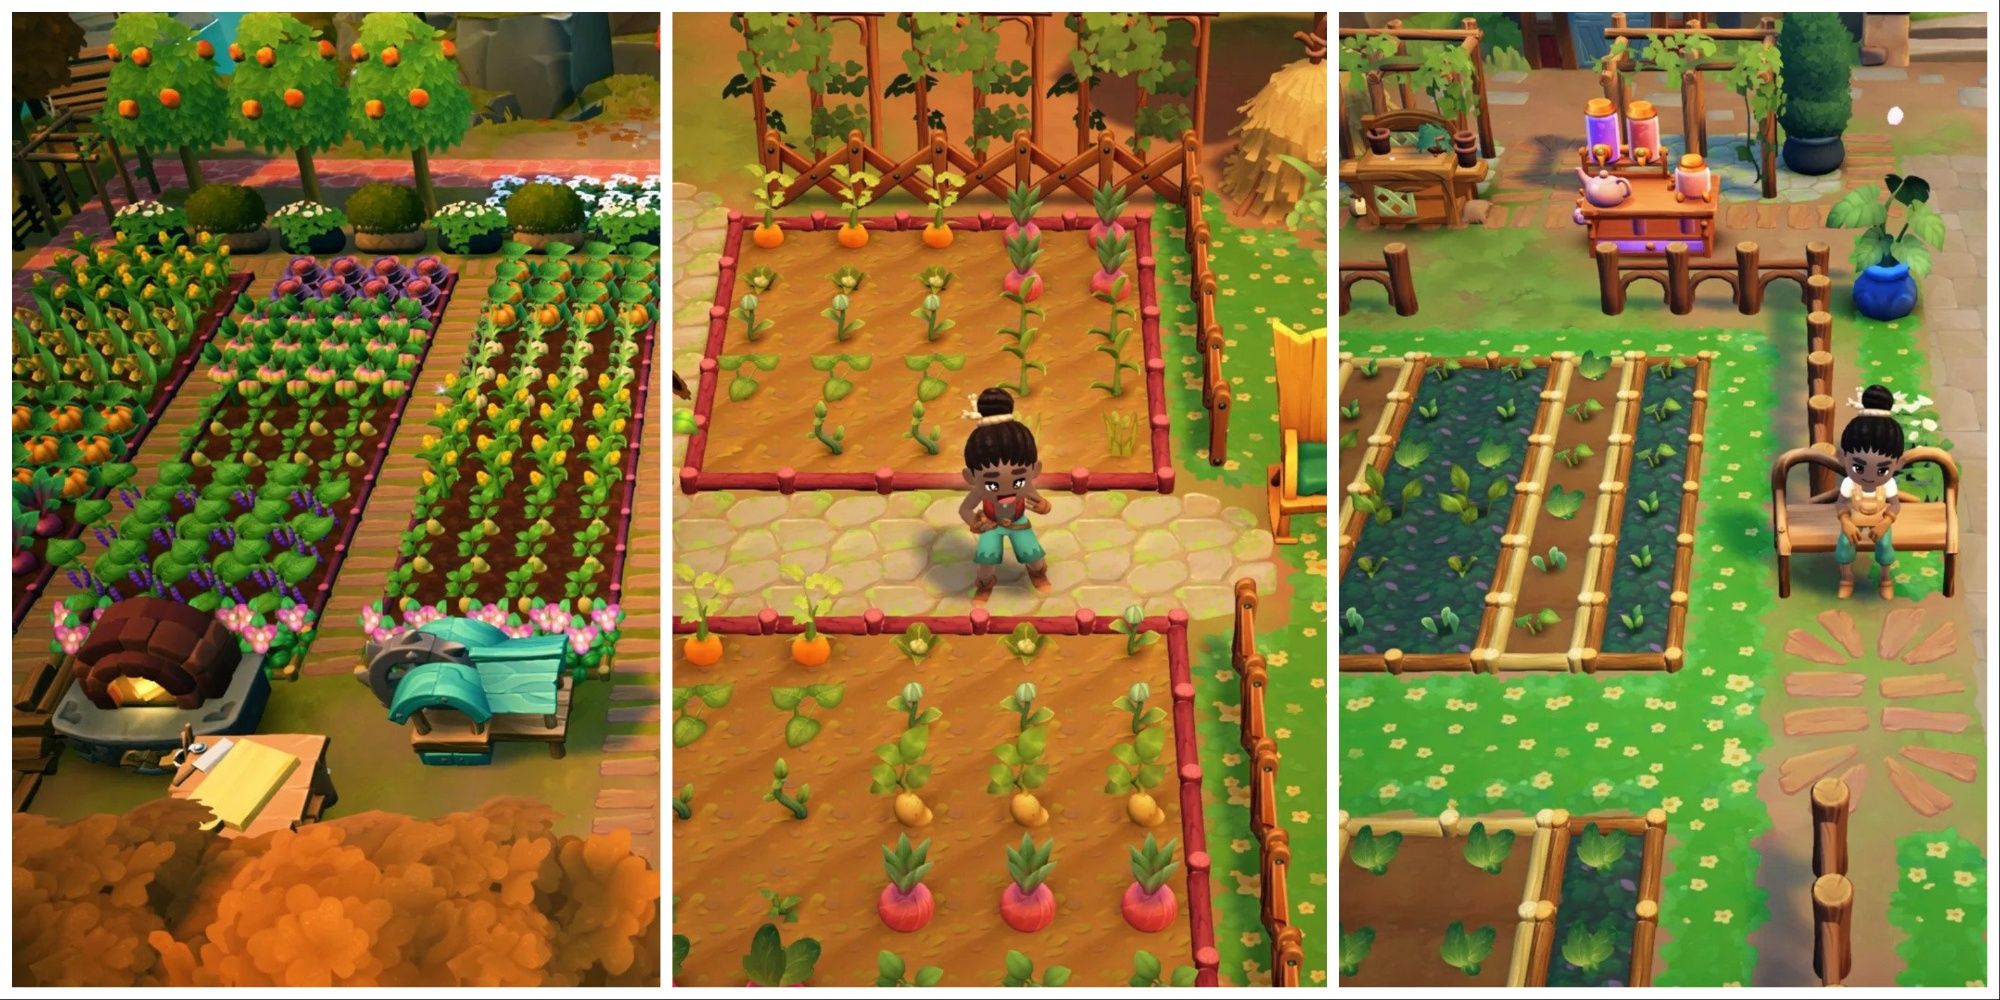 A field of crops, a player standing between their crops, and a player resting on a bench.